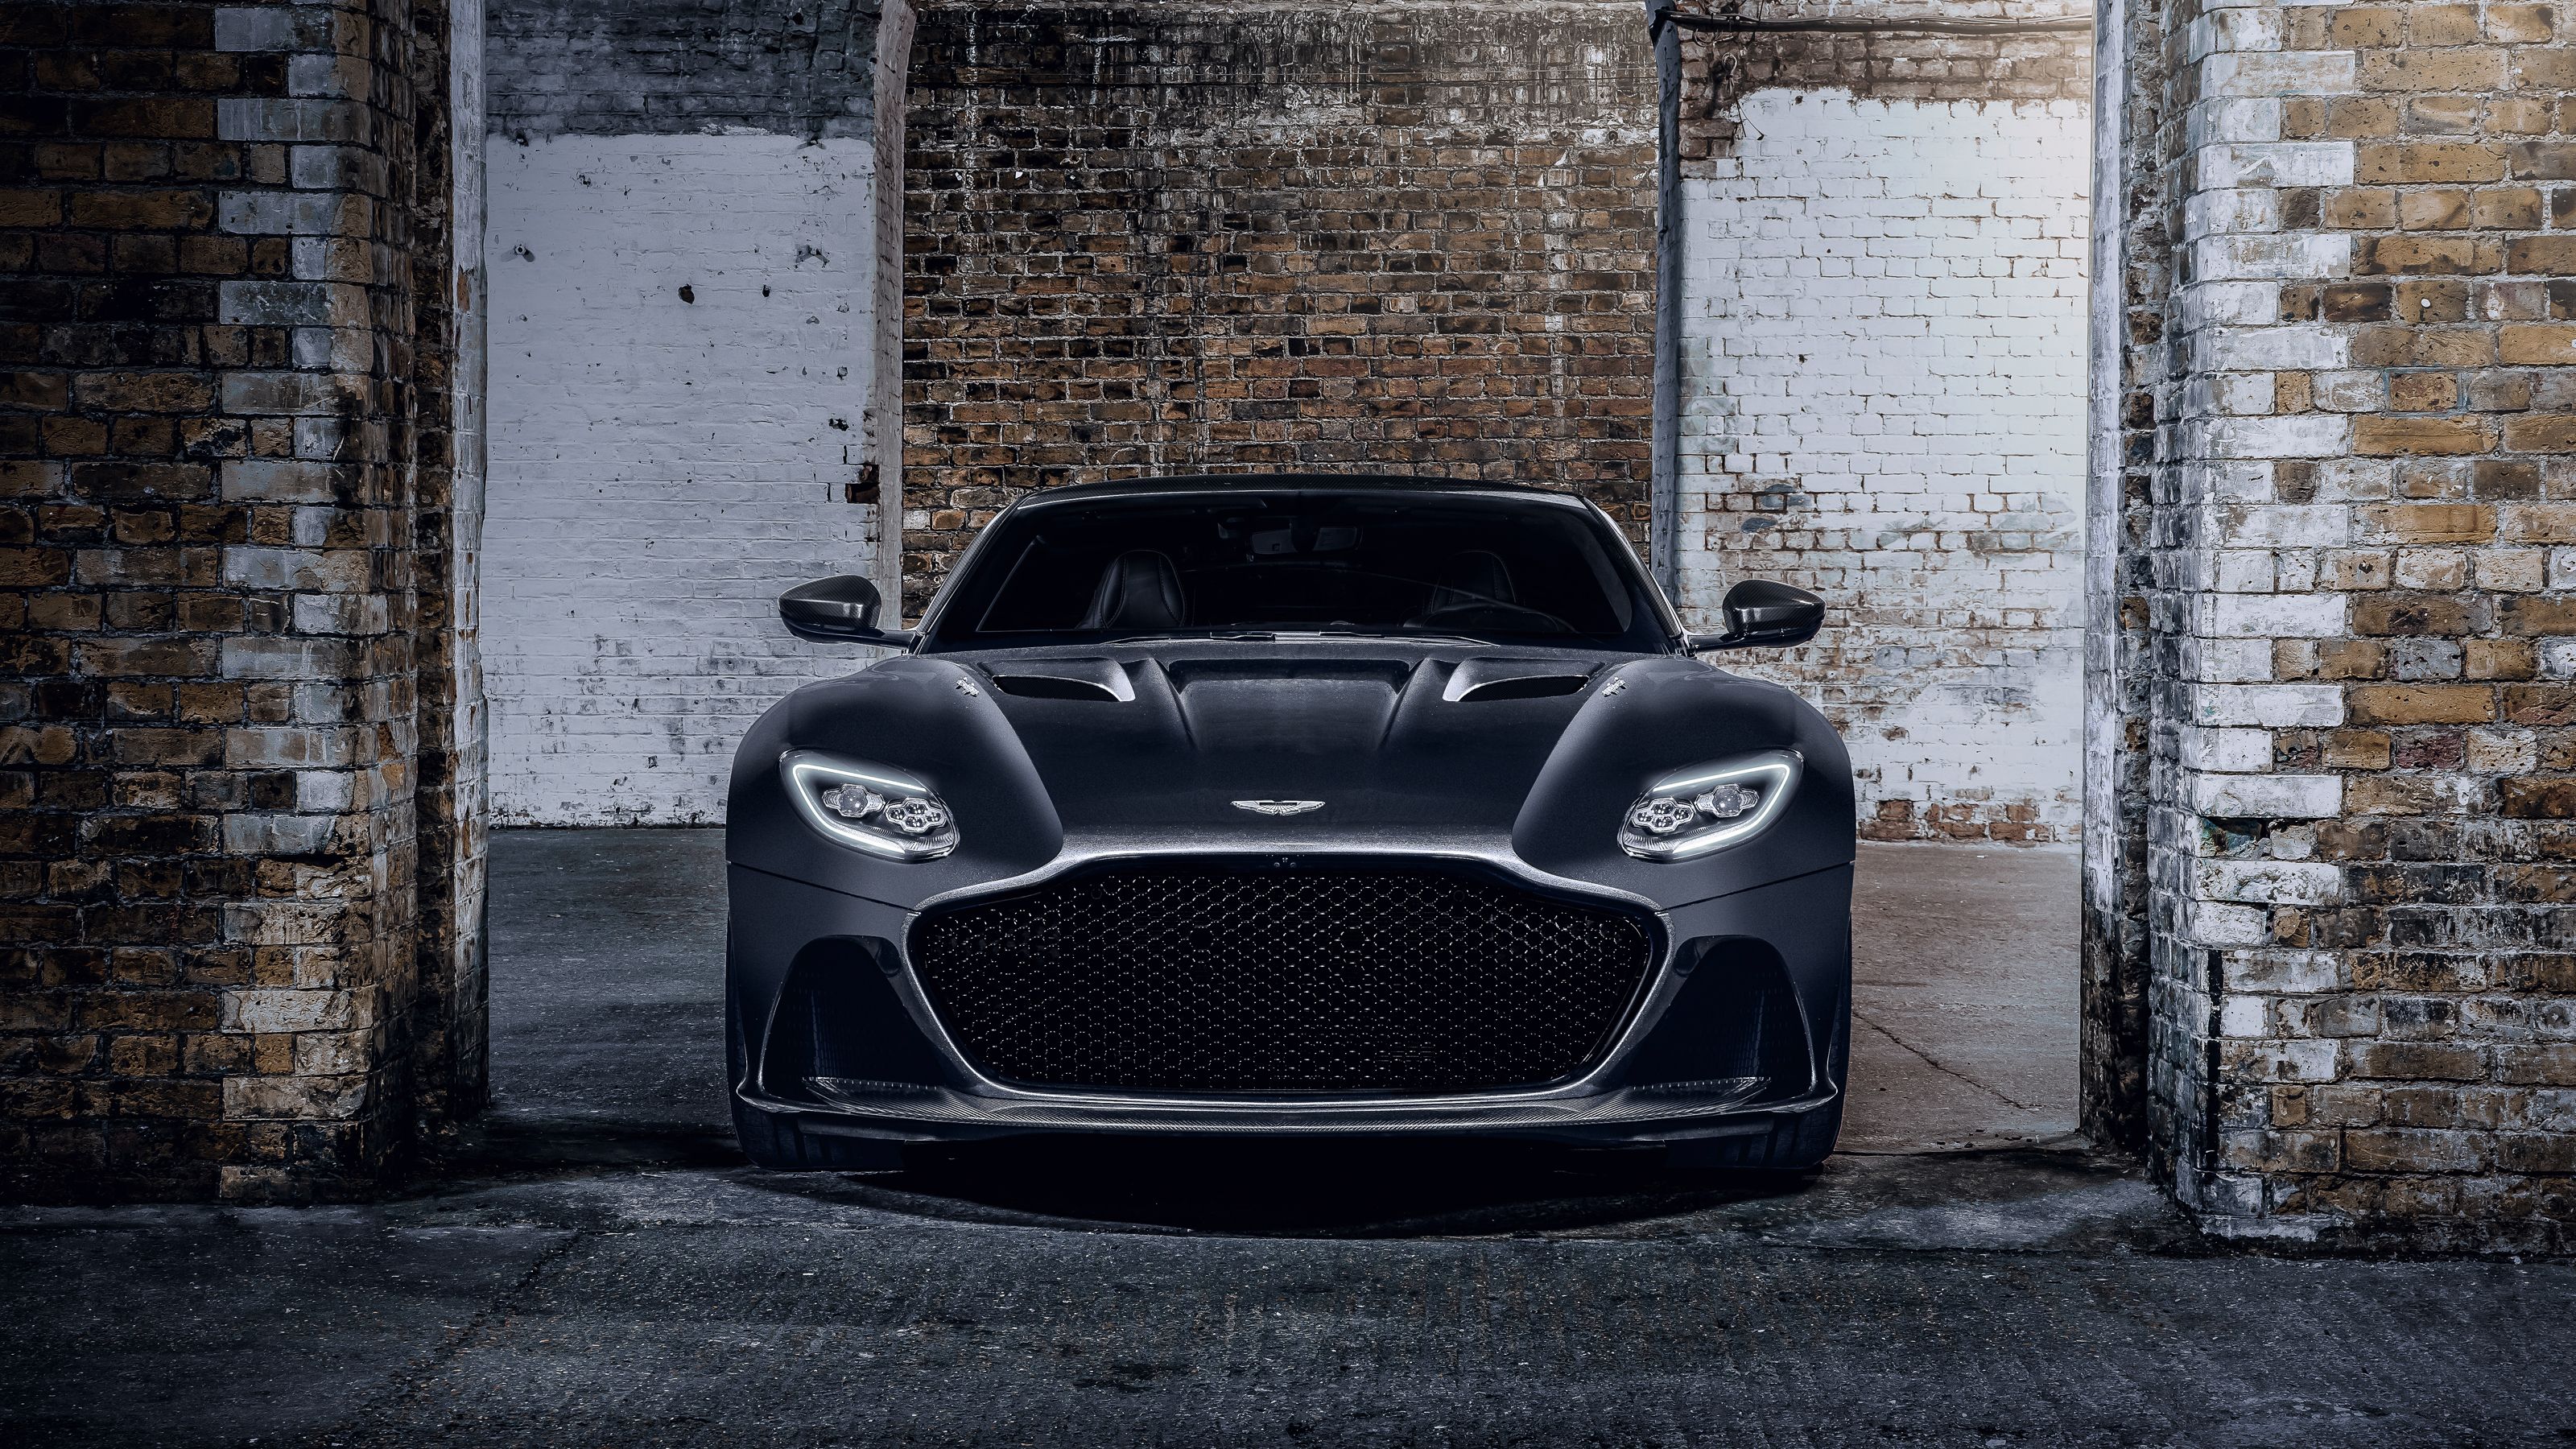 Aston Martin Builds 2 Limited-Edition 007 Cars